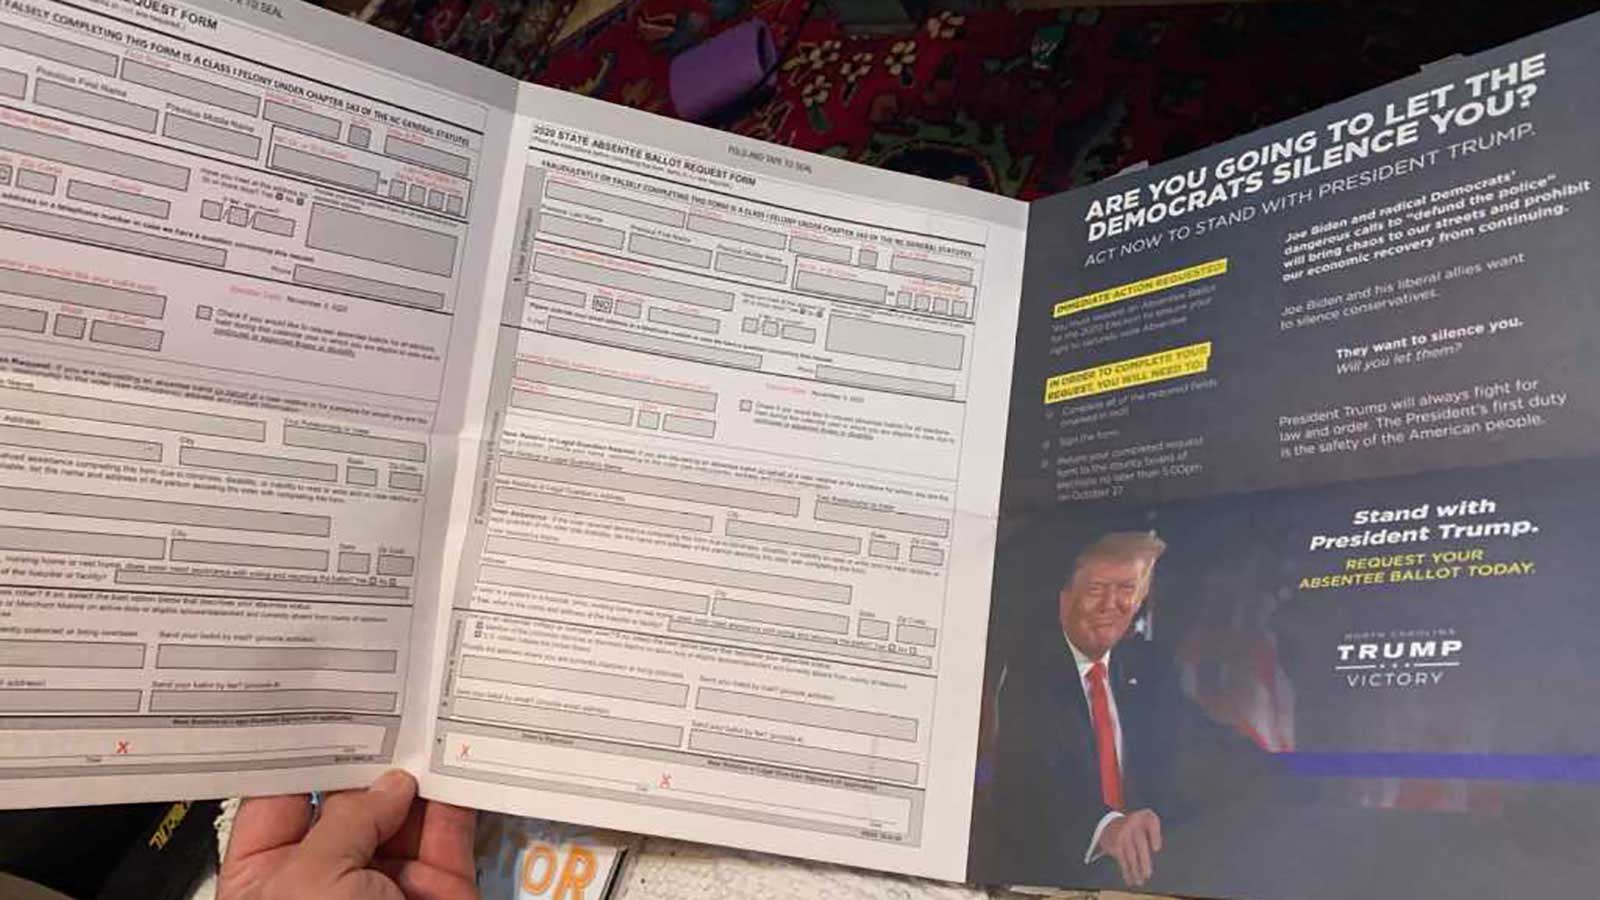 Trumps Face on ballot material equals fraud